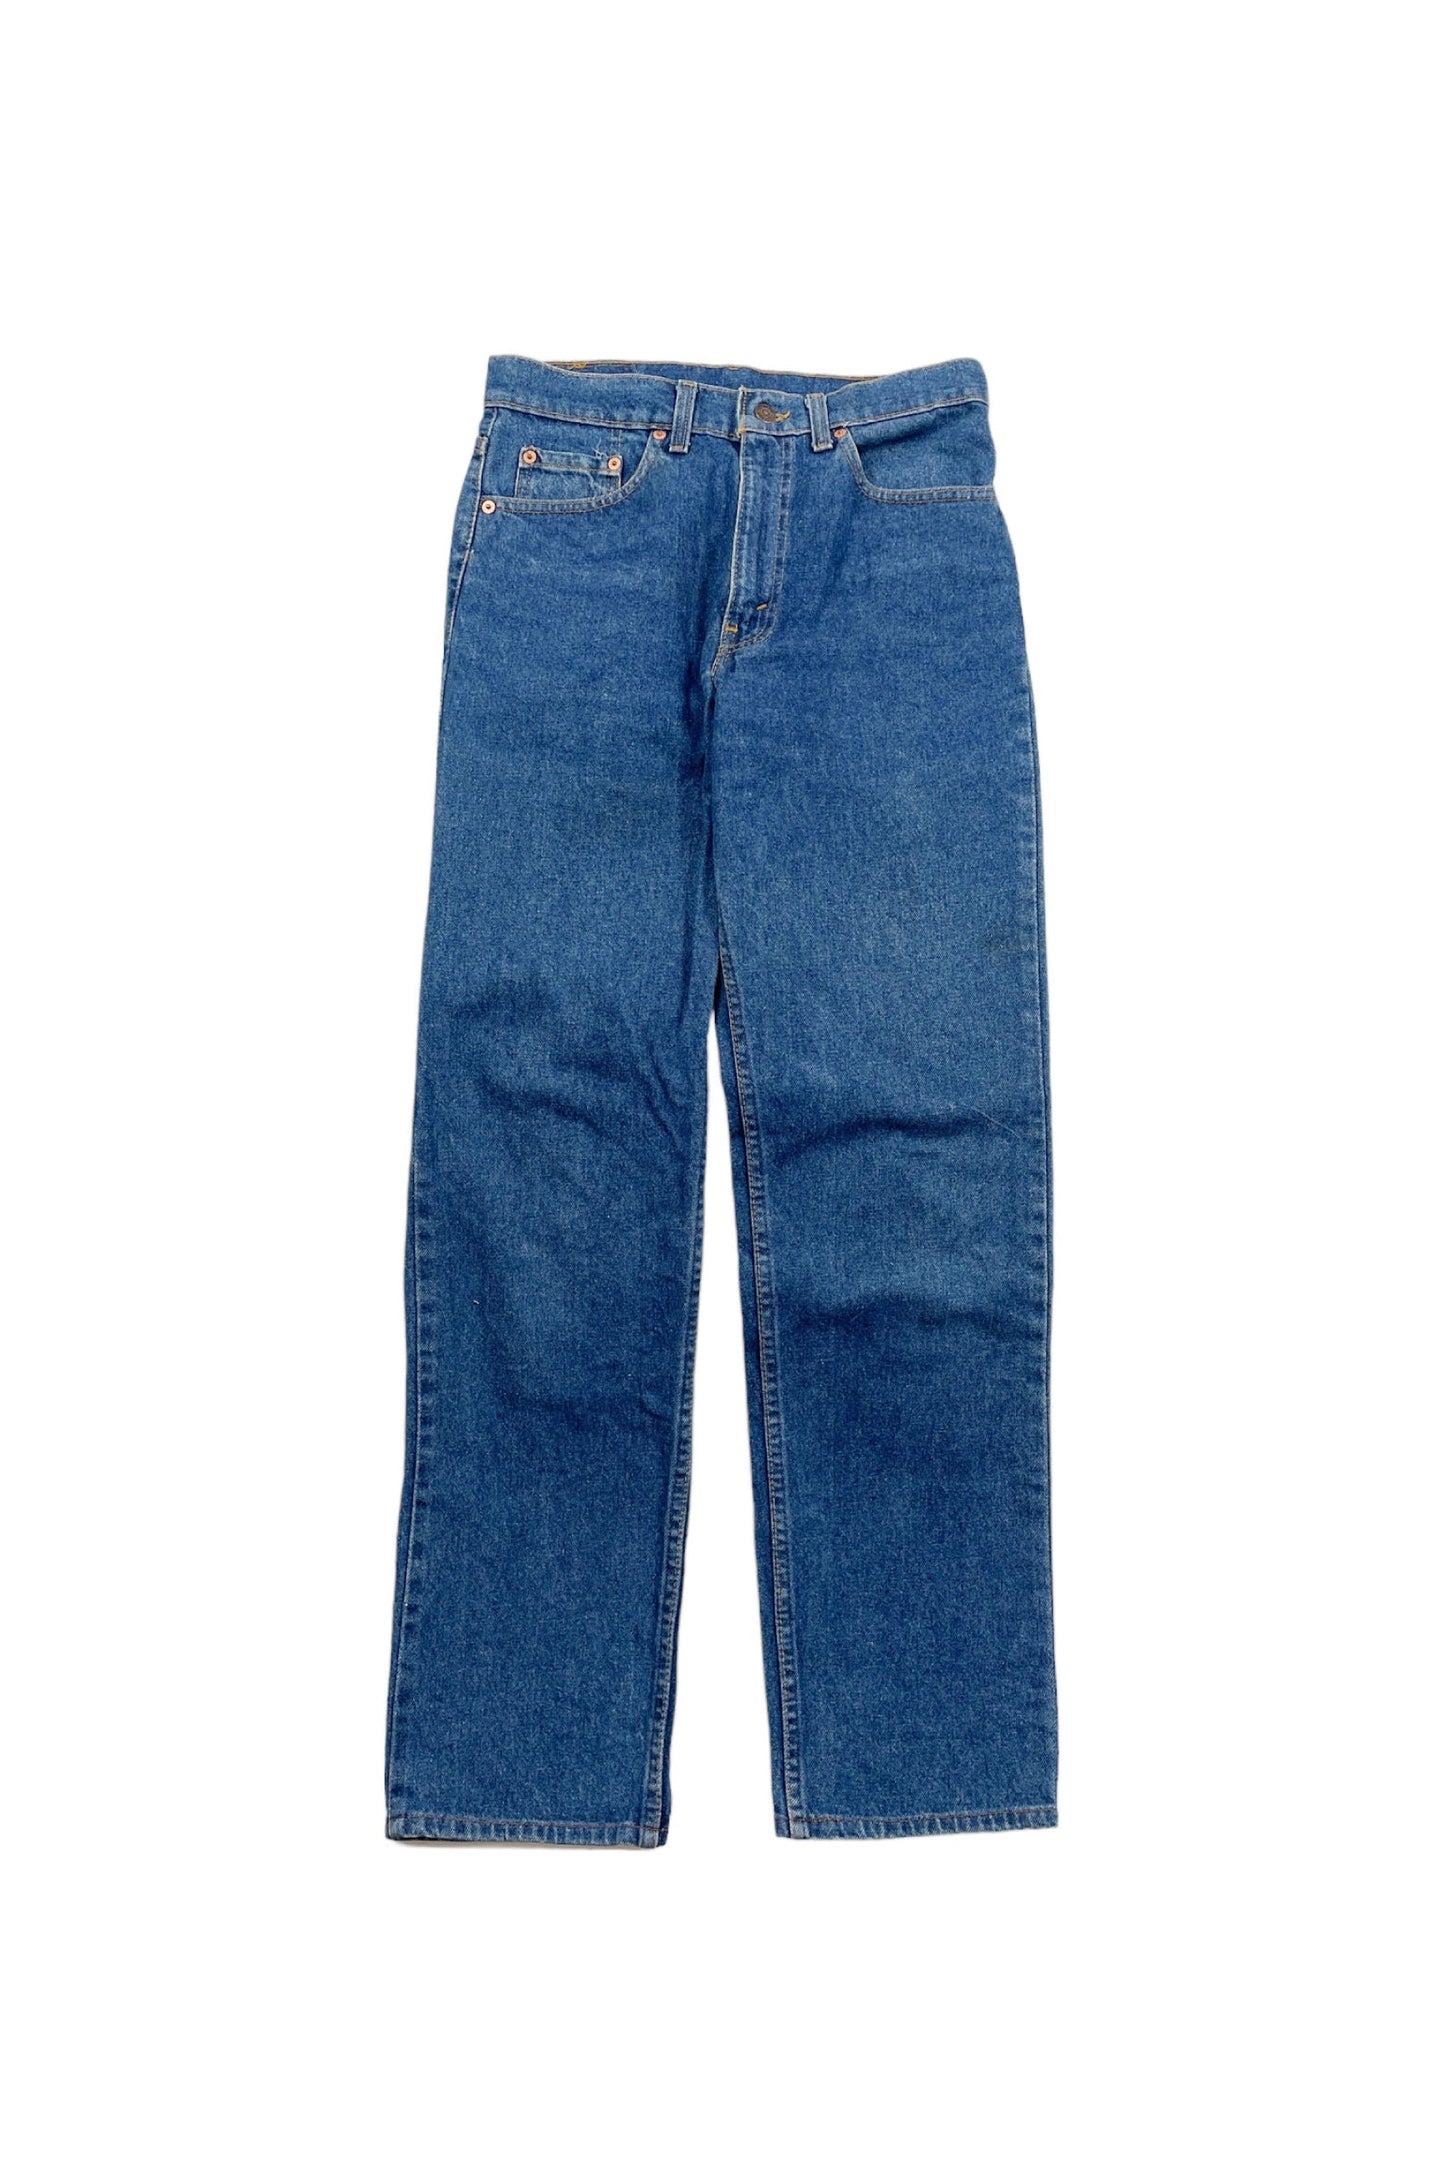 90's Made in USA Levi's 510-0217 denim pants – ReSCOUNT STORE